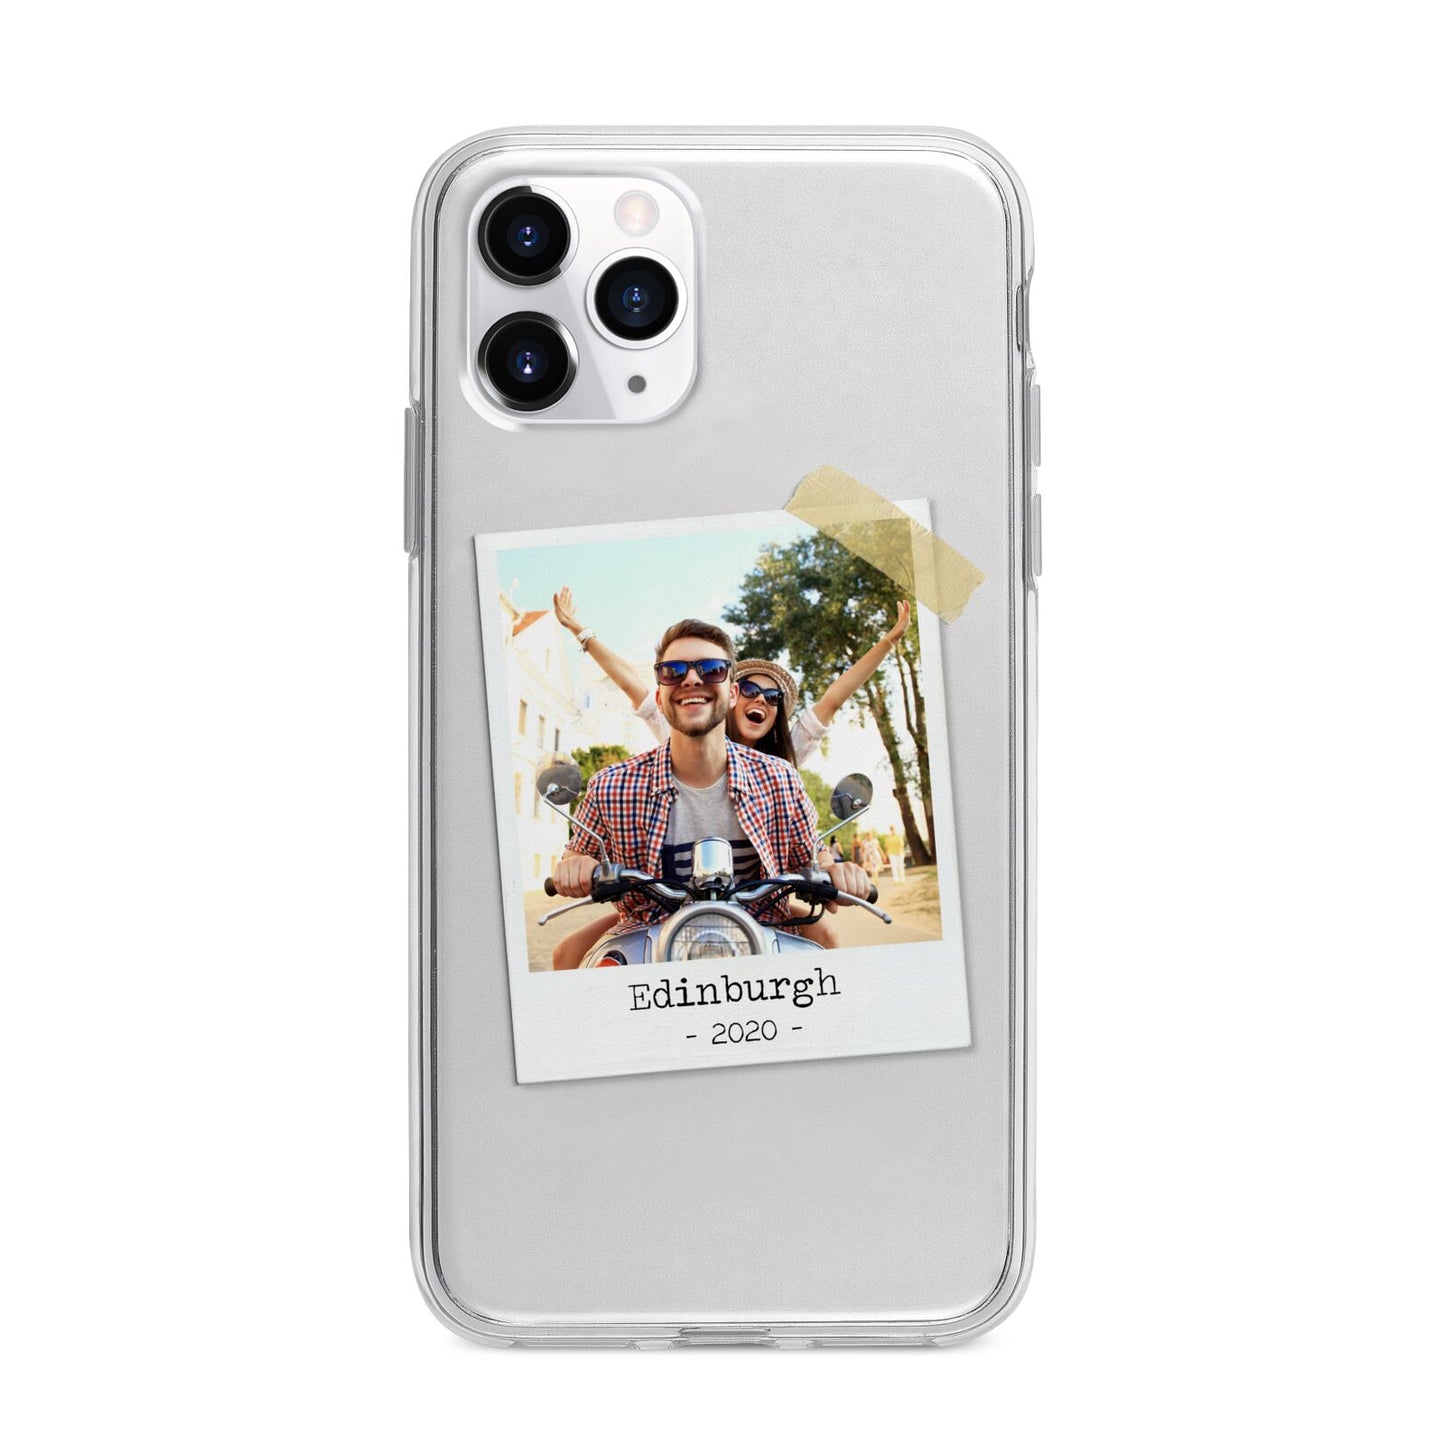 Taped Holiday Snap Photo Upload Apple iPhone 11 Pro Max in Silver with Bumper Case